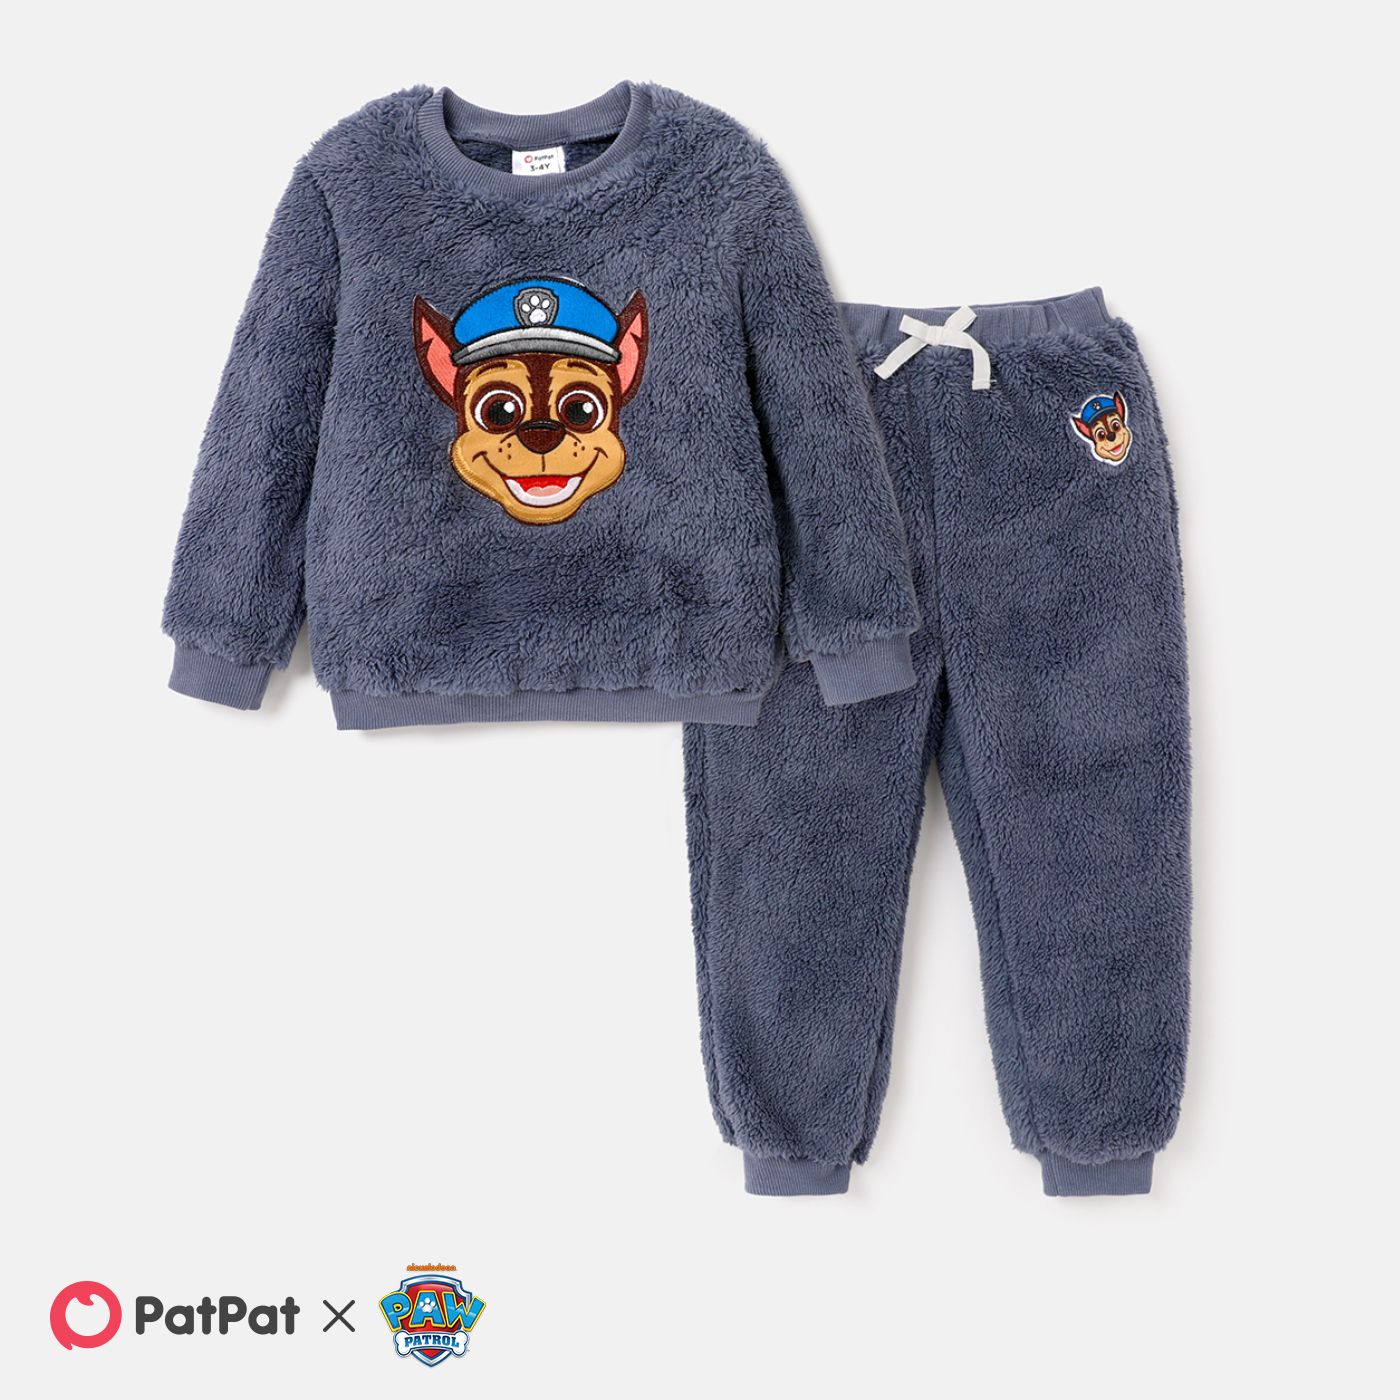 

PAW Patrol 2pcs Toddler Girl/Boy Character Print Fuzzy Pullover and Pants Set